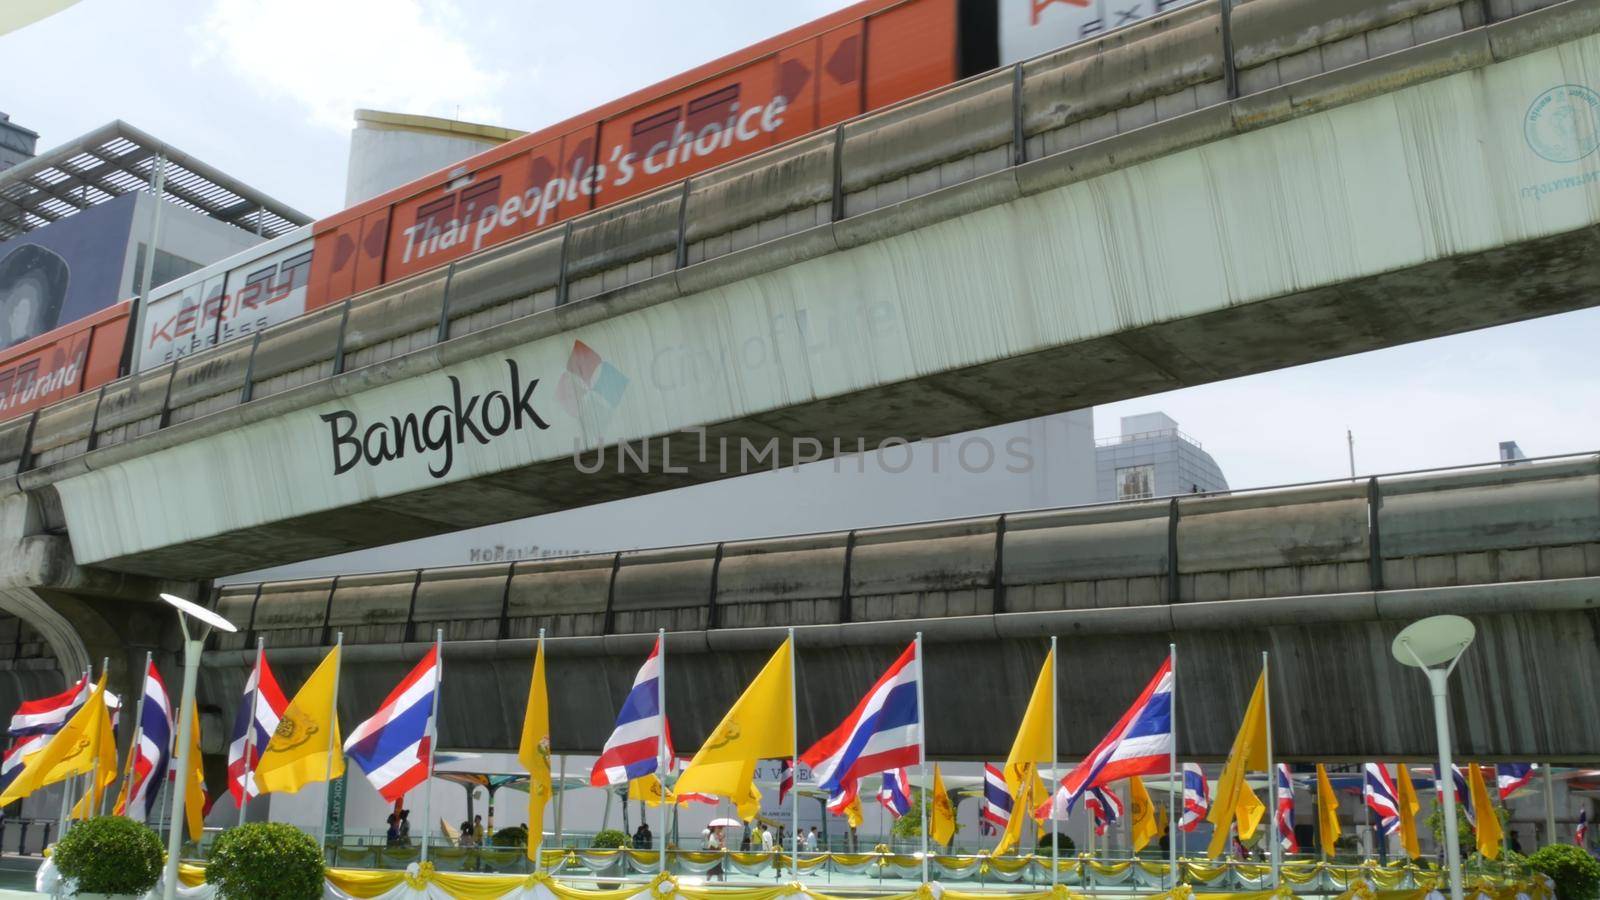 BANGKOK, THAILAND - 11 JULY, 2019: Pedestrians walking on the bridge near MBK and Siam Square under BTS train line. People in festive modern city decorated with waving national flags and royal symbol by DogoraSun